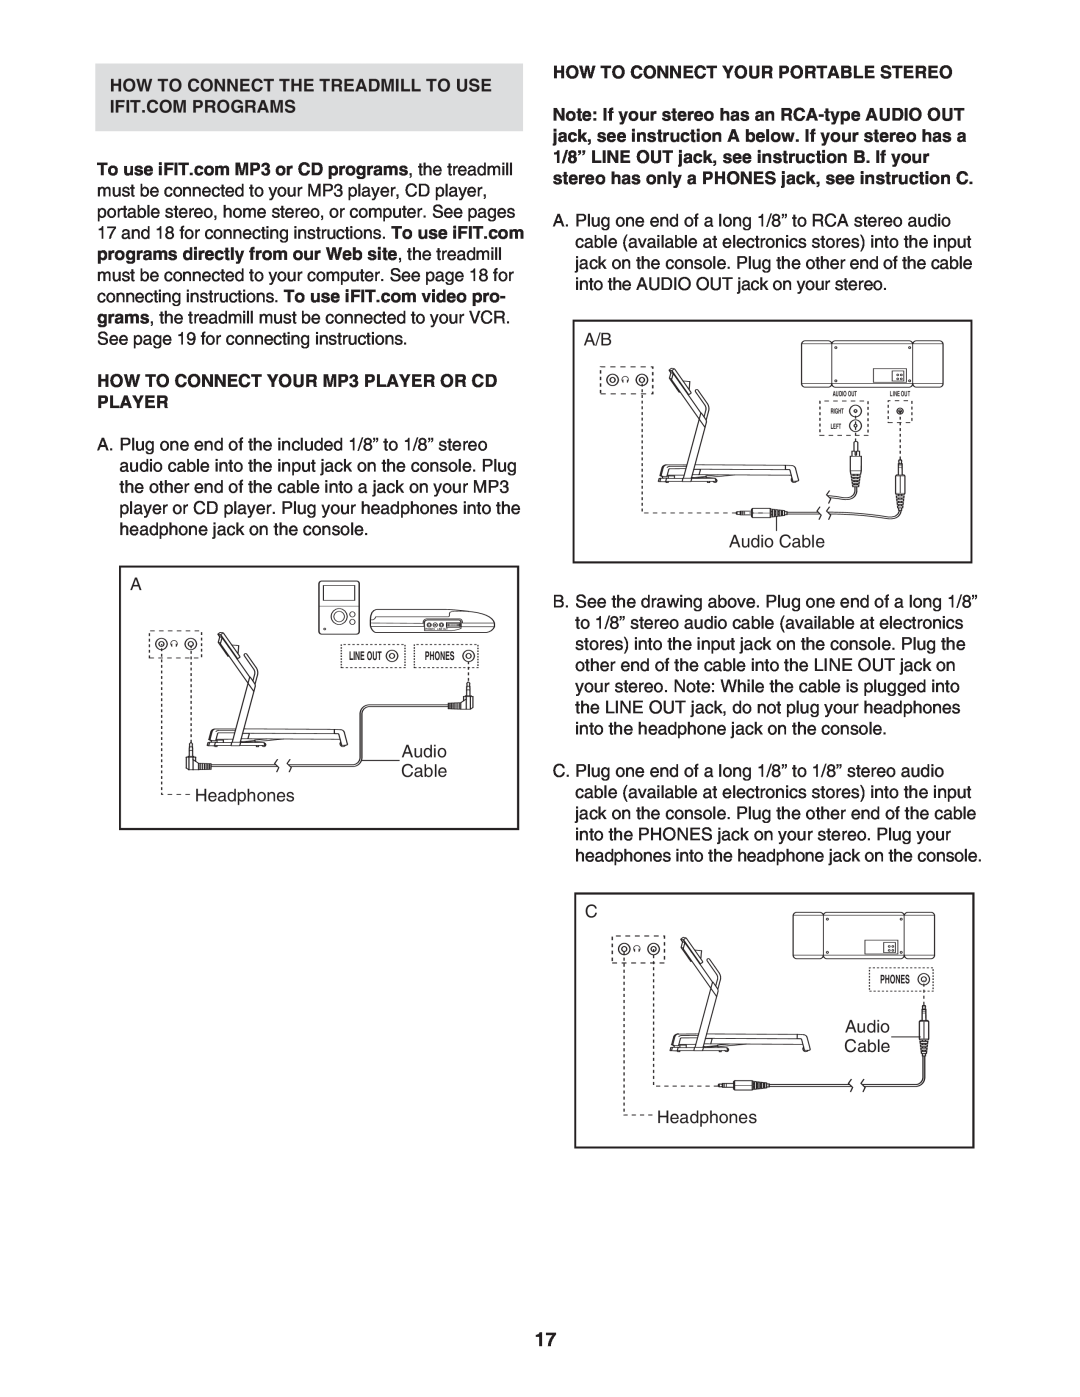 NordicTrack 30600.0 user manual How To Connect The Treadmill To Use Ifit.Com Programs 